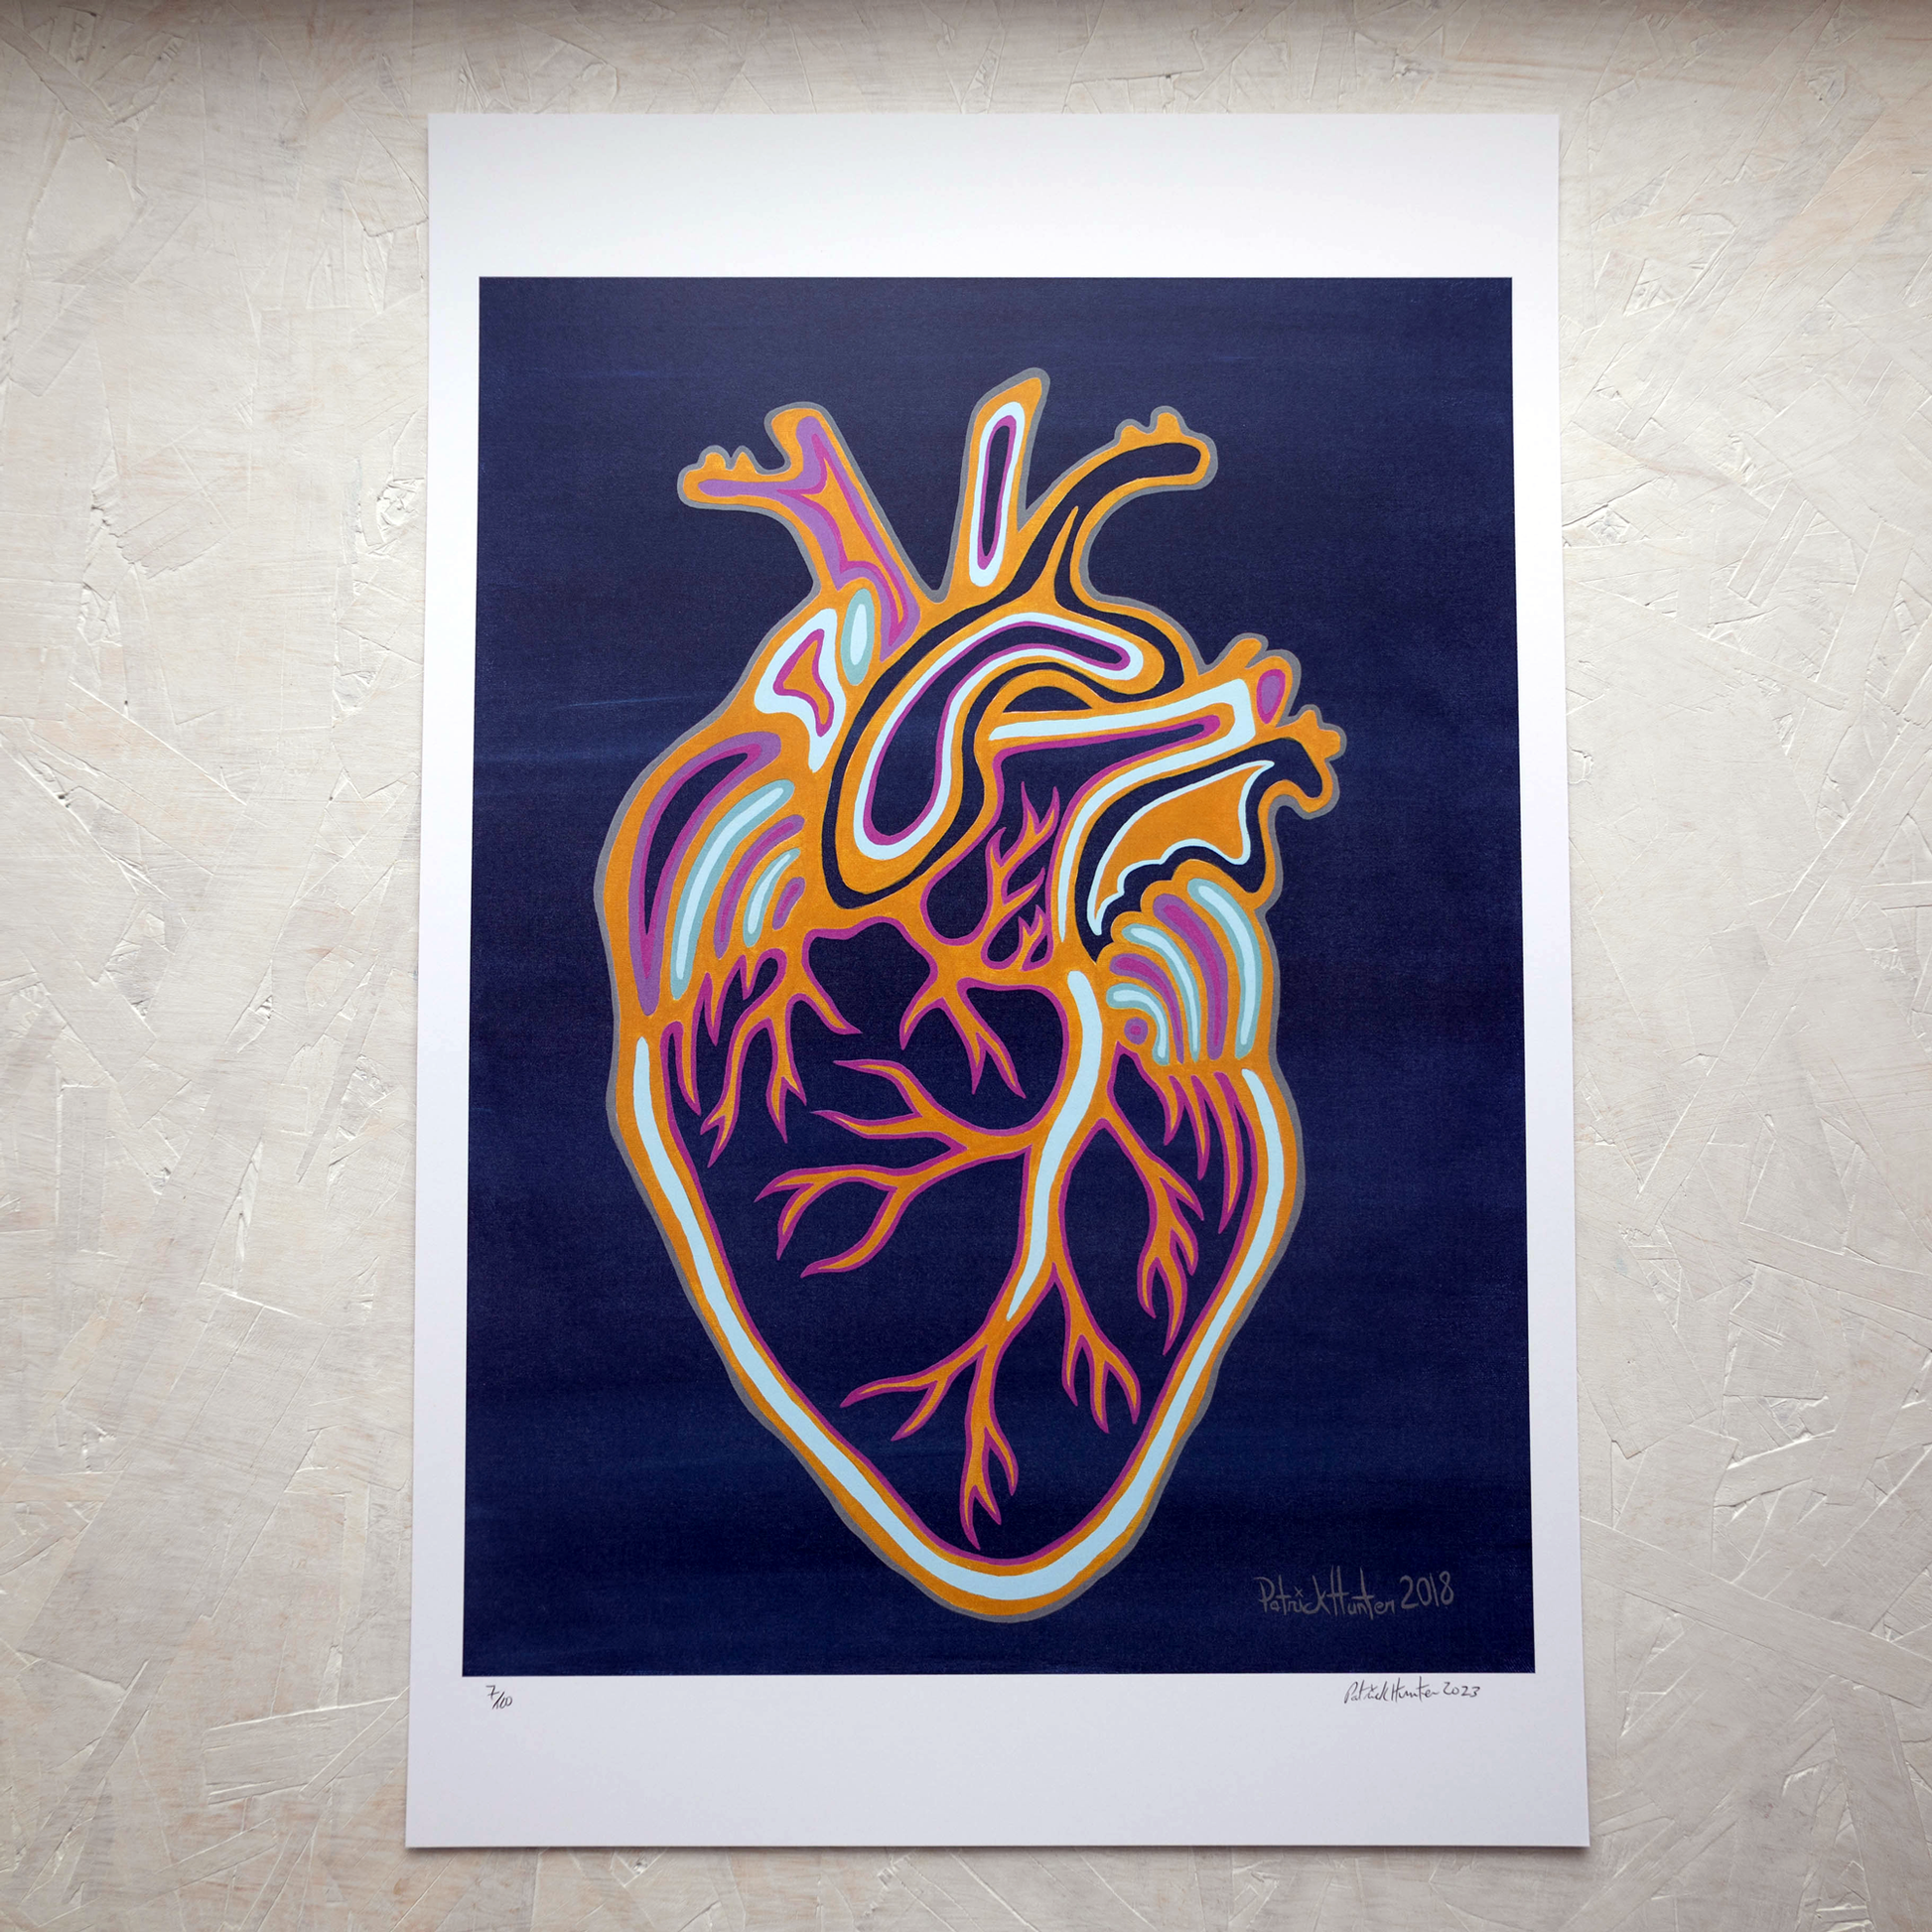 Print of Patrick Hunter's painting of an anatomical heart on dark blue background, woodland art style.